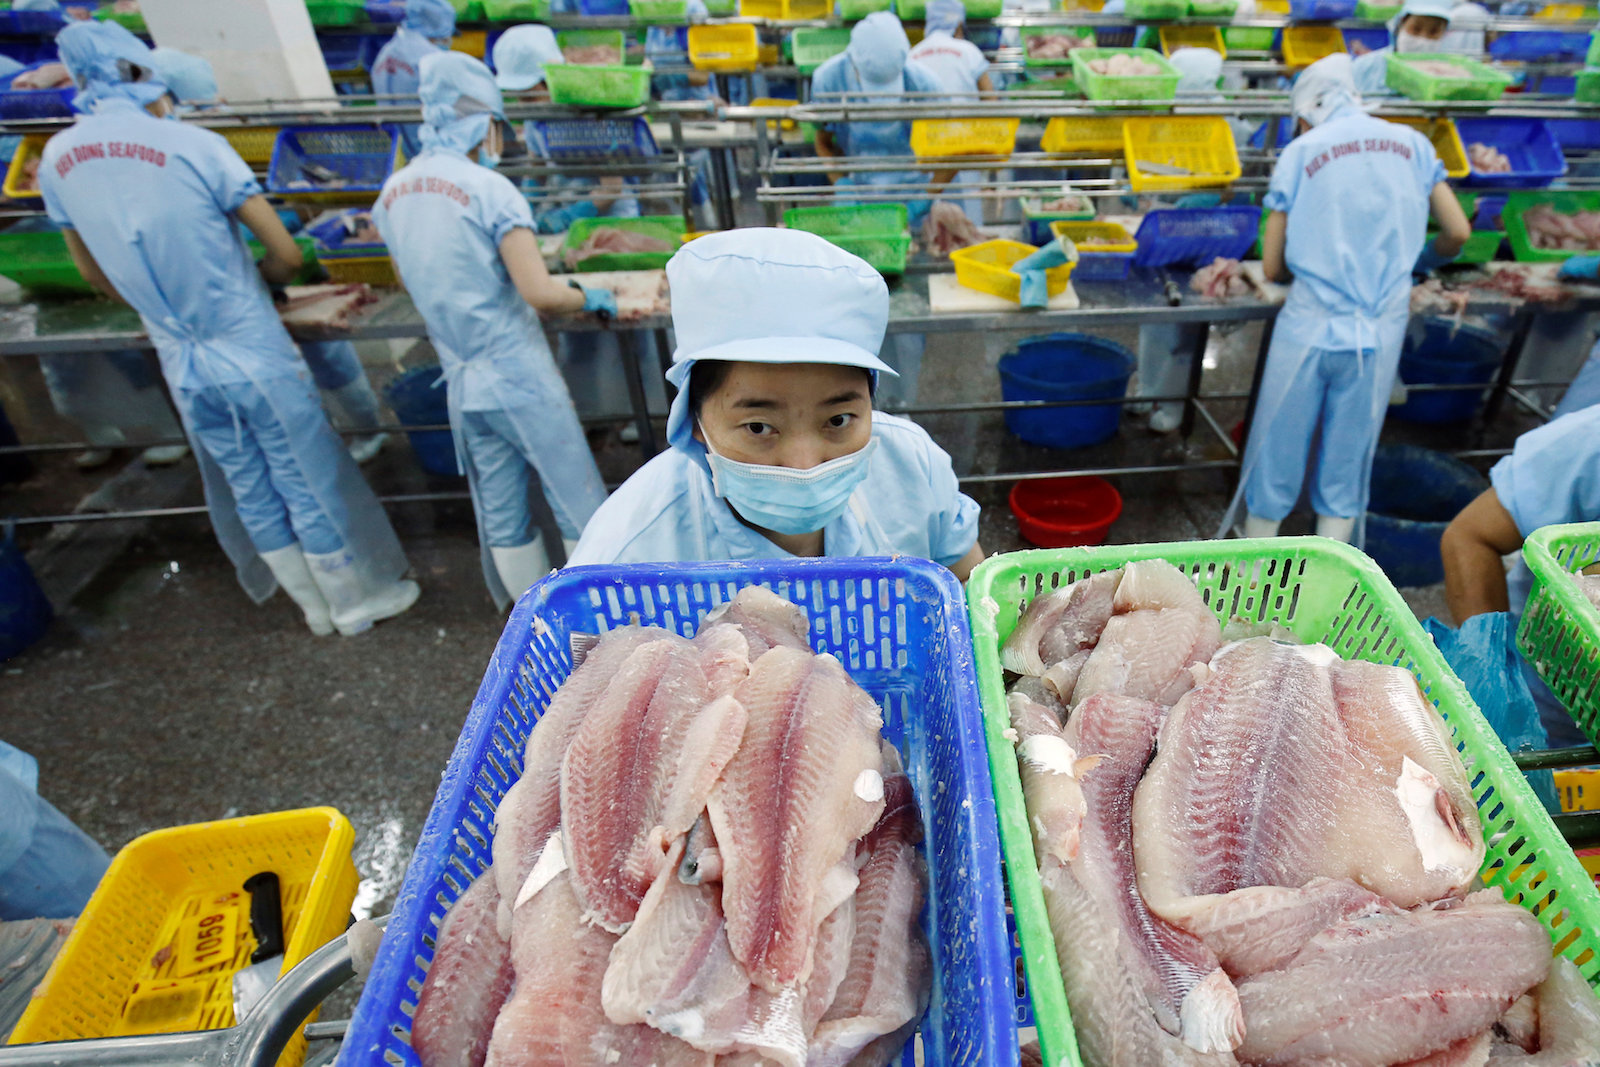 Workers make fillets of Swai fish at a Bien Dong Seafood Company factory in the southern Vietnam city of Can Tho, July 7, 2017. Photo: Reuters/Kham